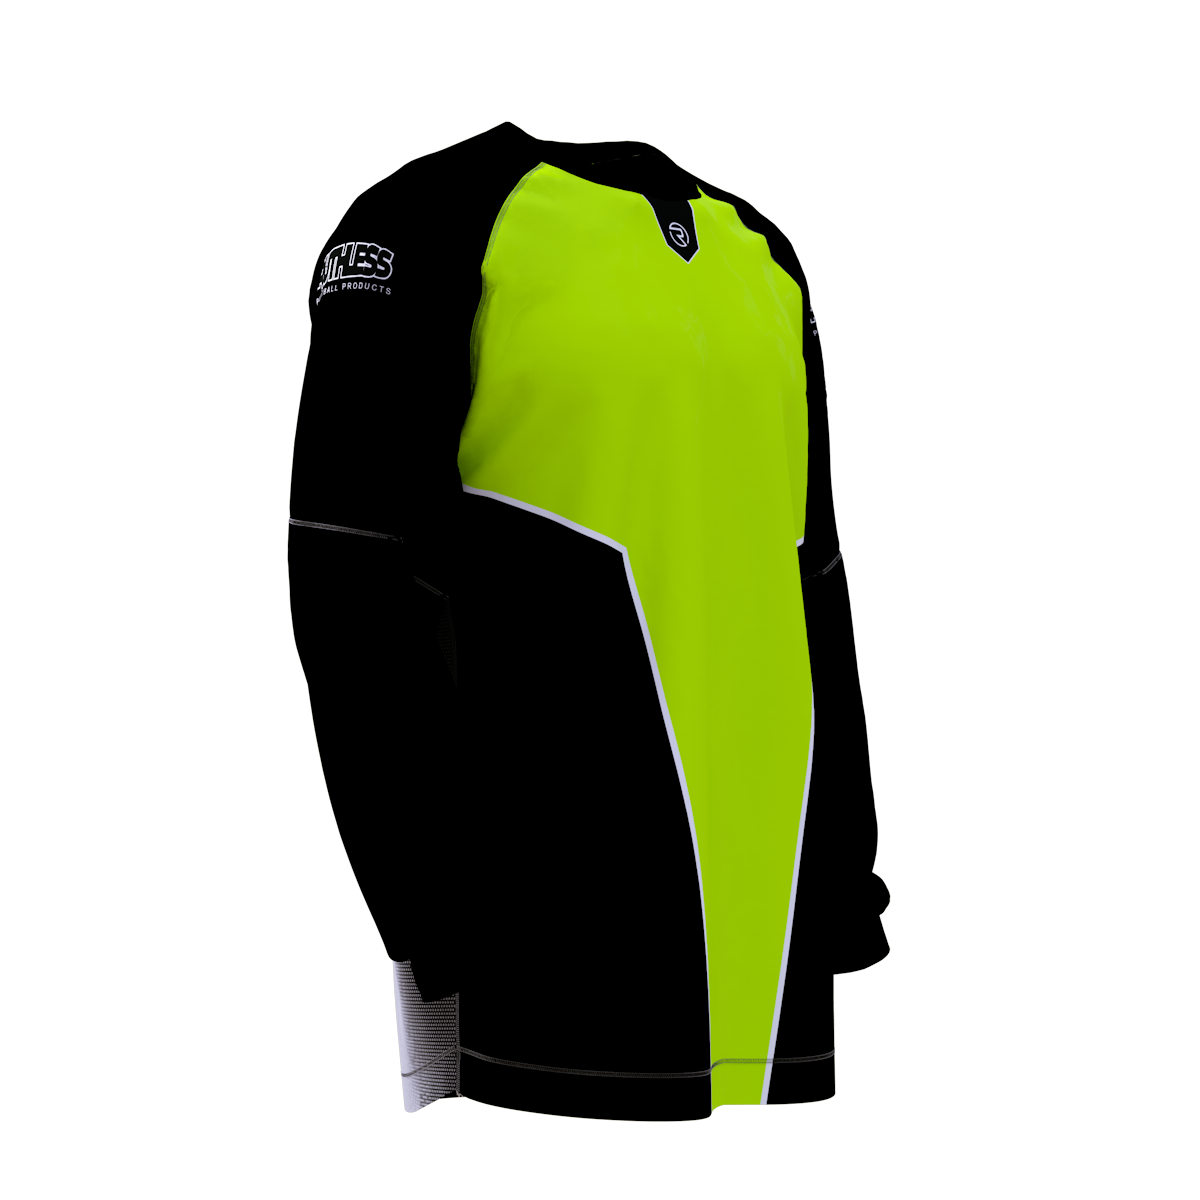 Basic Center Breeze Jersey - Ruthless Paintball Products